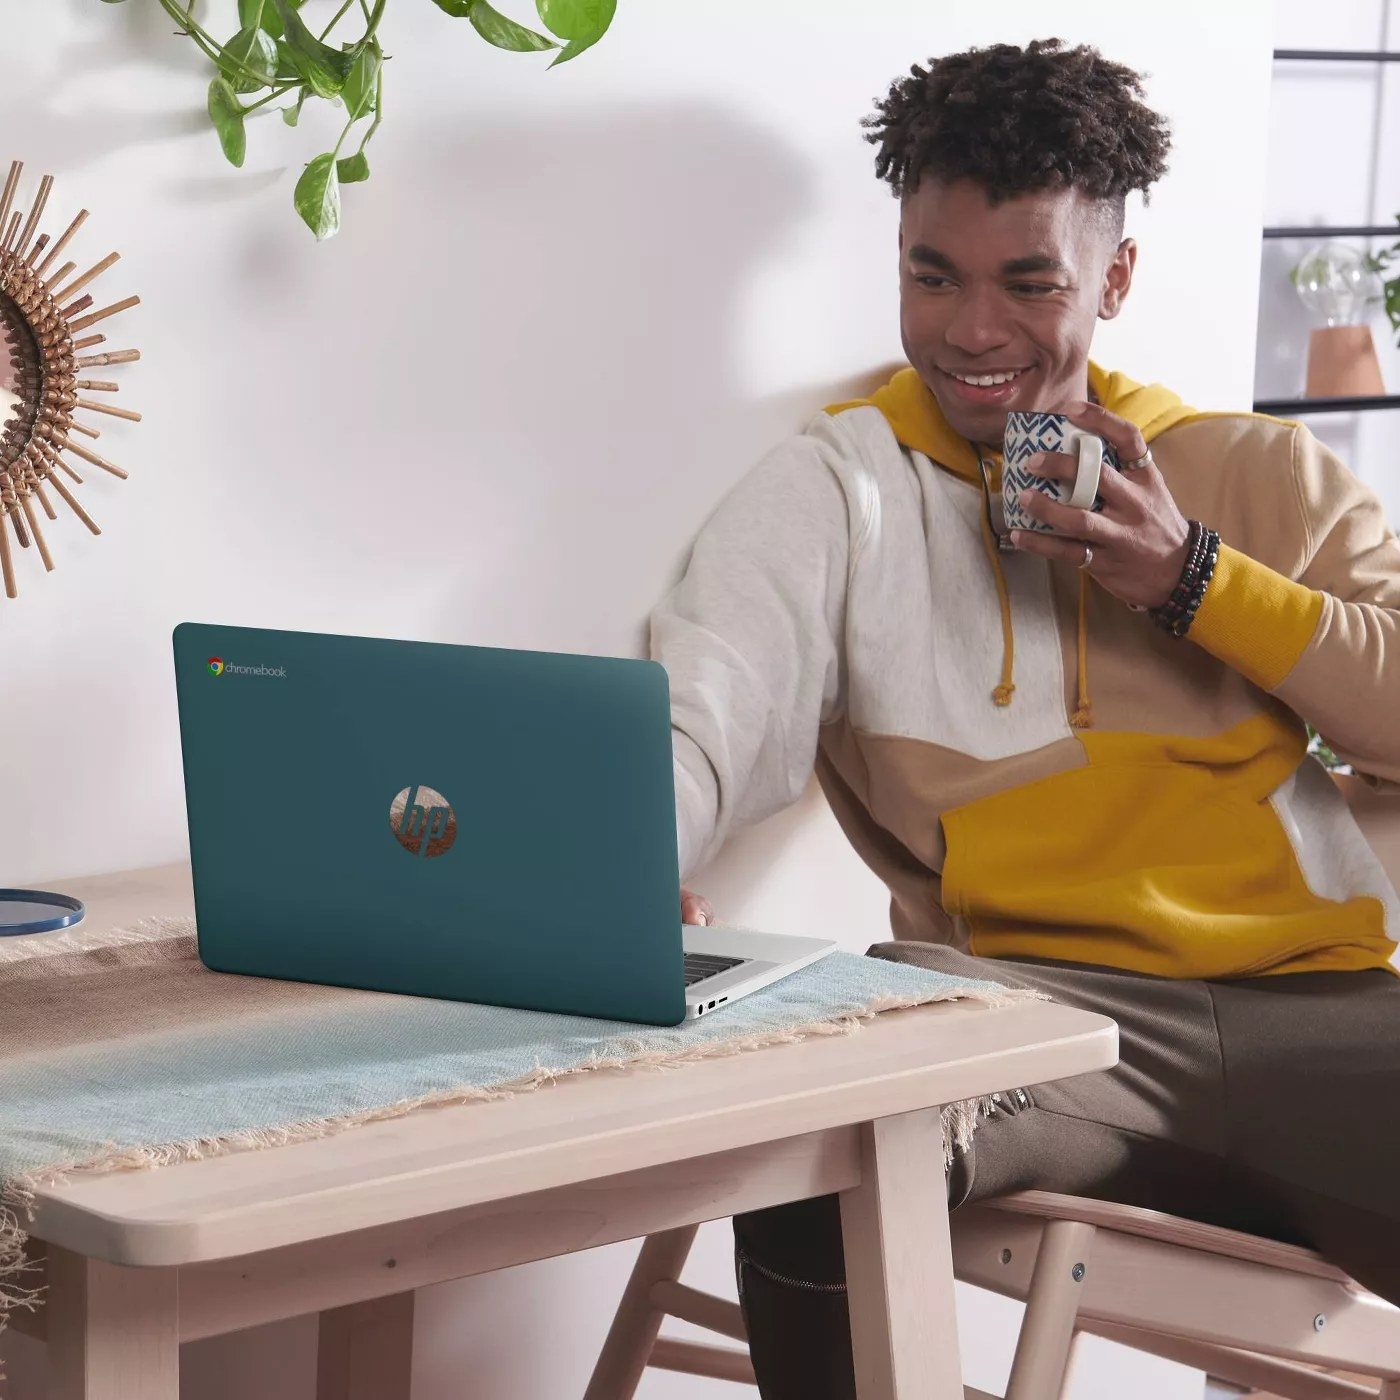 A model working at the teal HP laptop